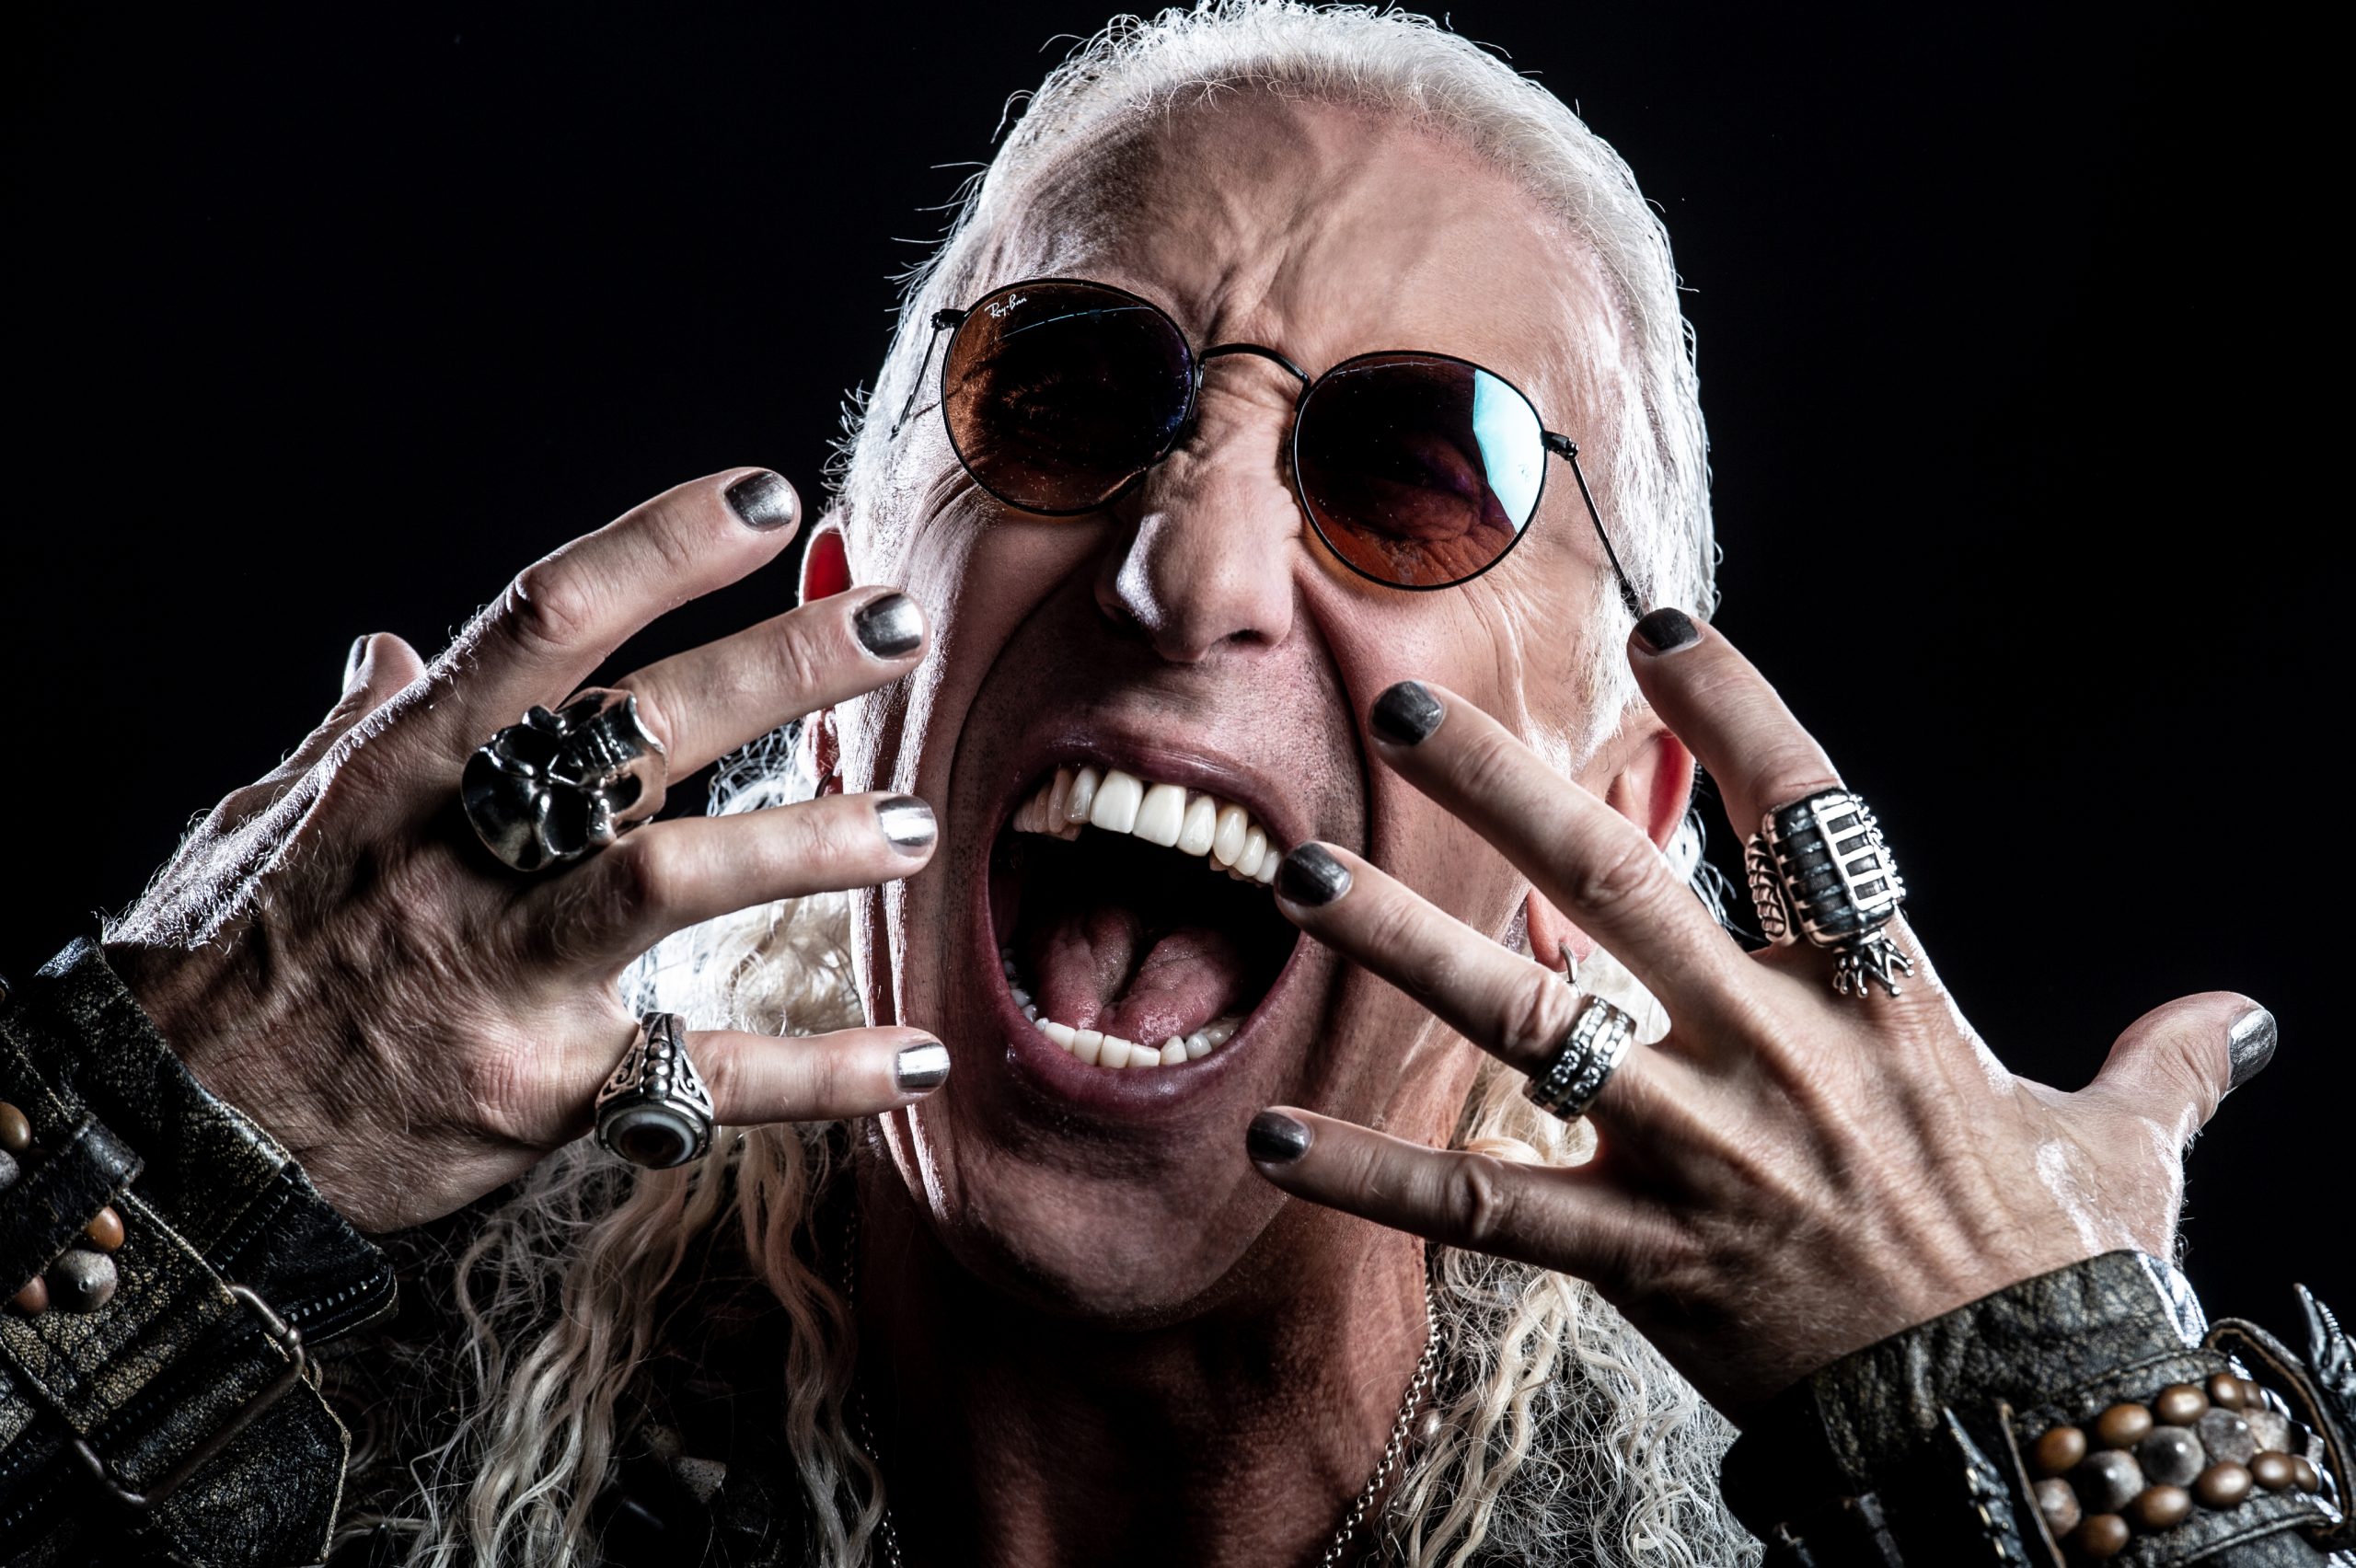 Dee Snider for the love of metal live